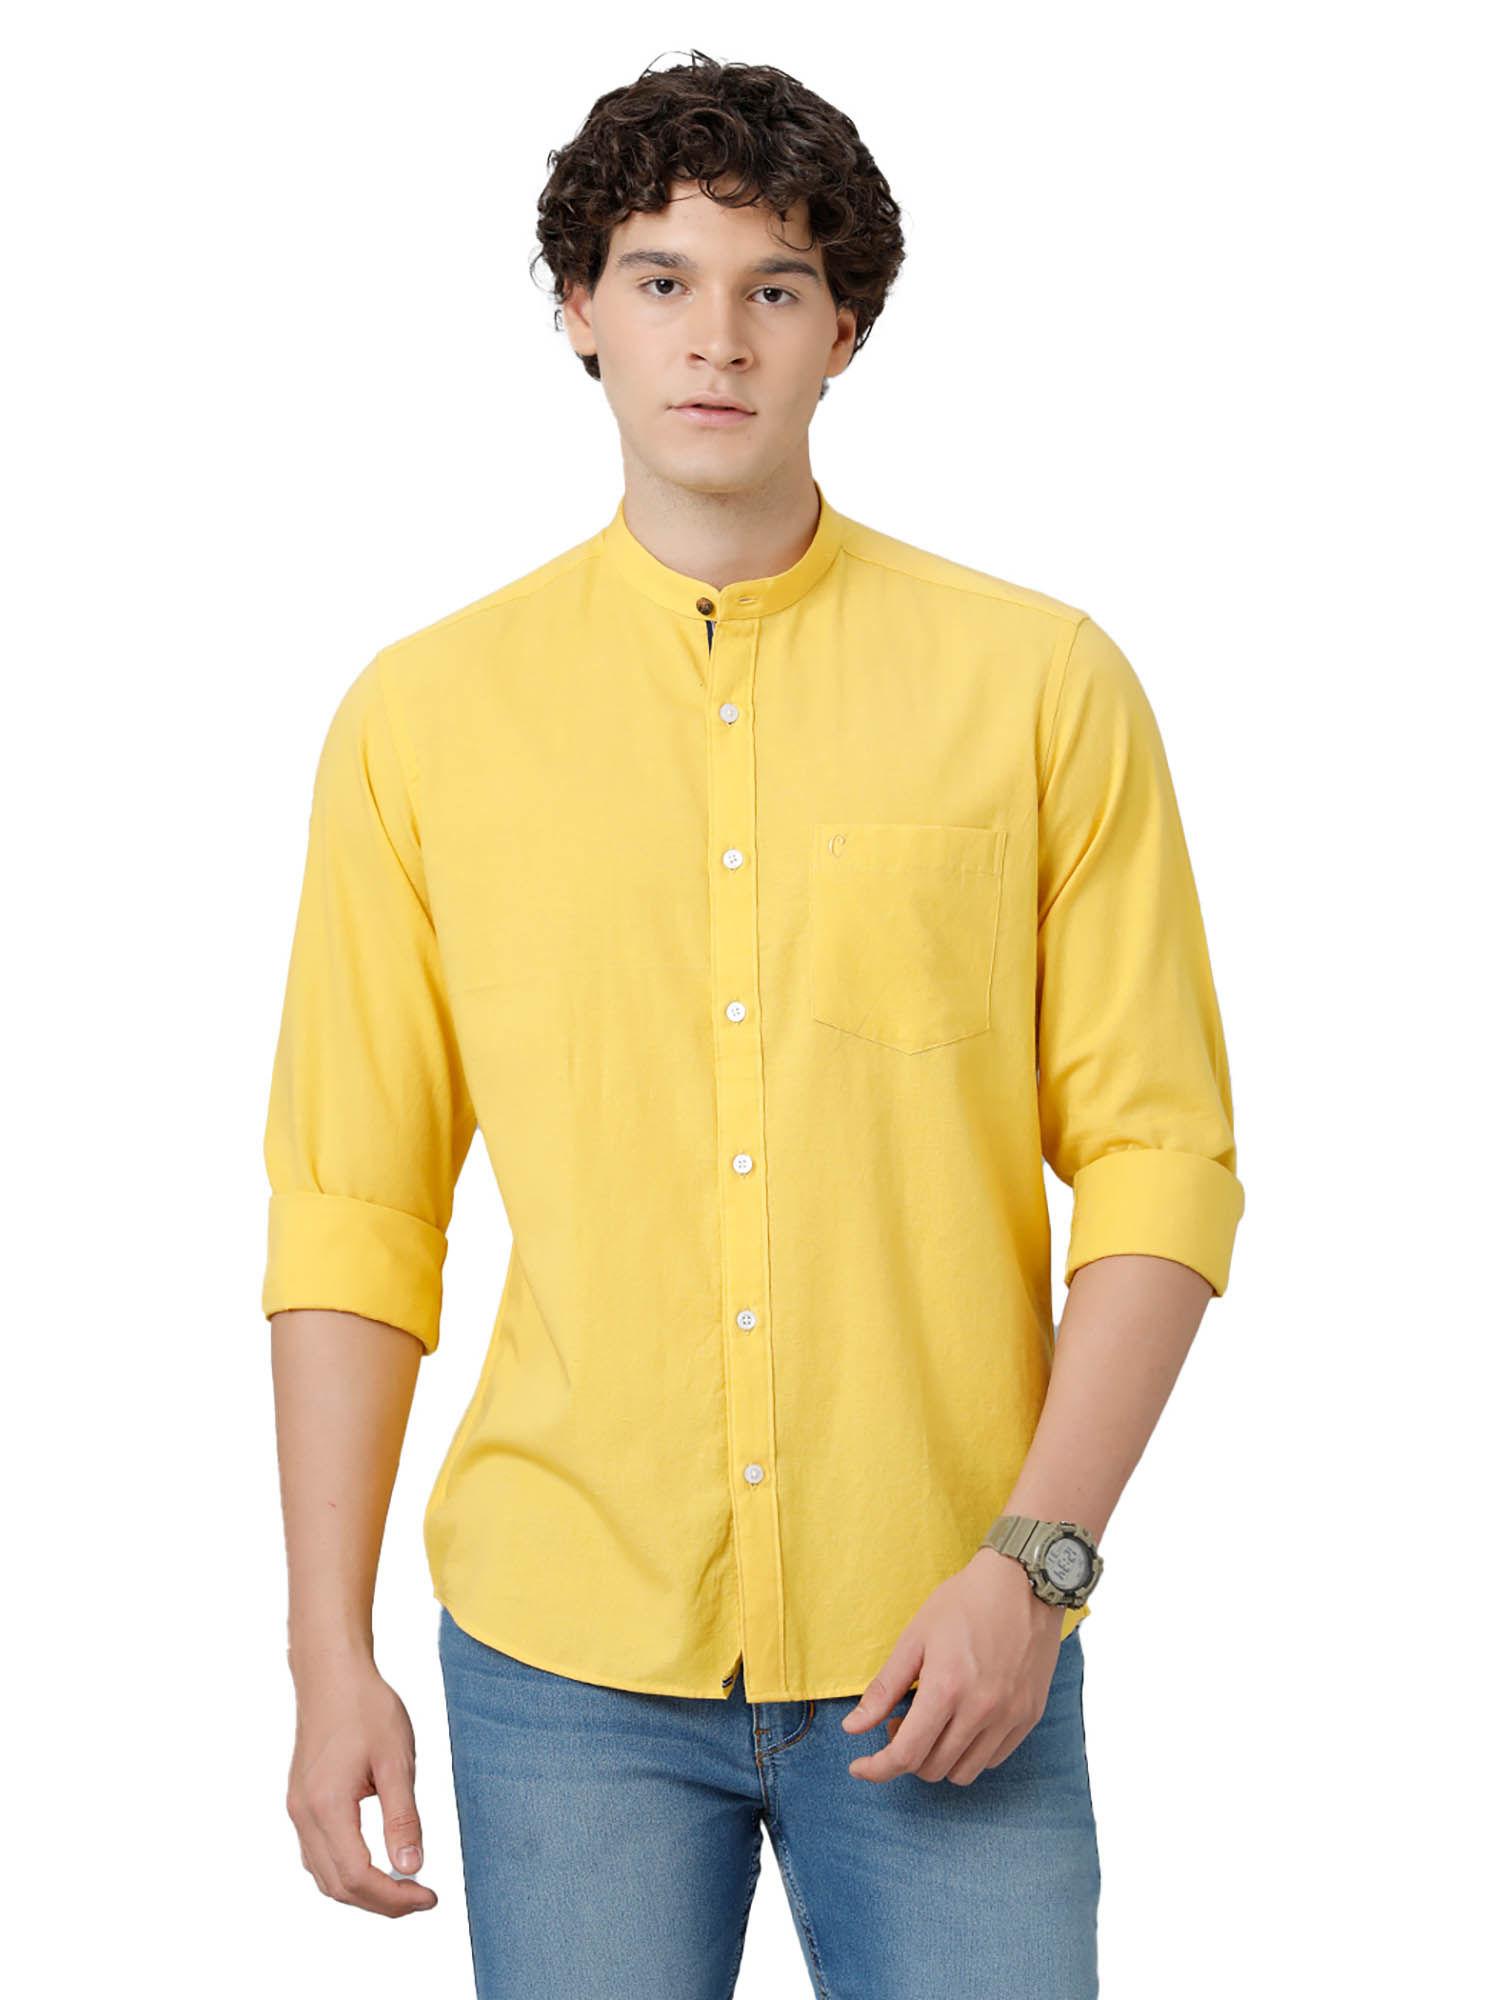 men's cotton linen yellow solid slim fit full sleeve casual shirt